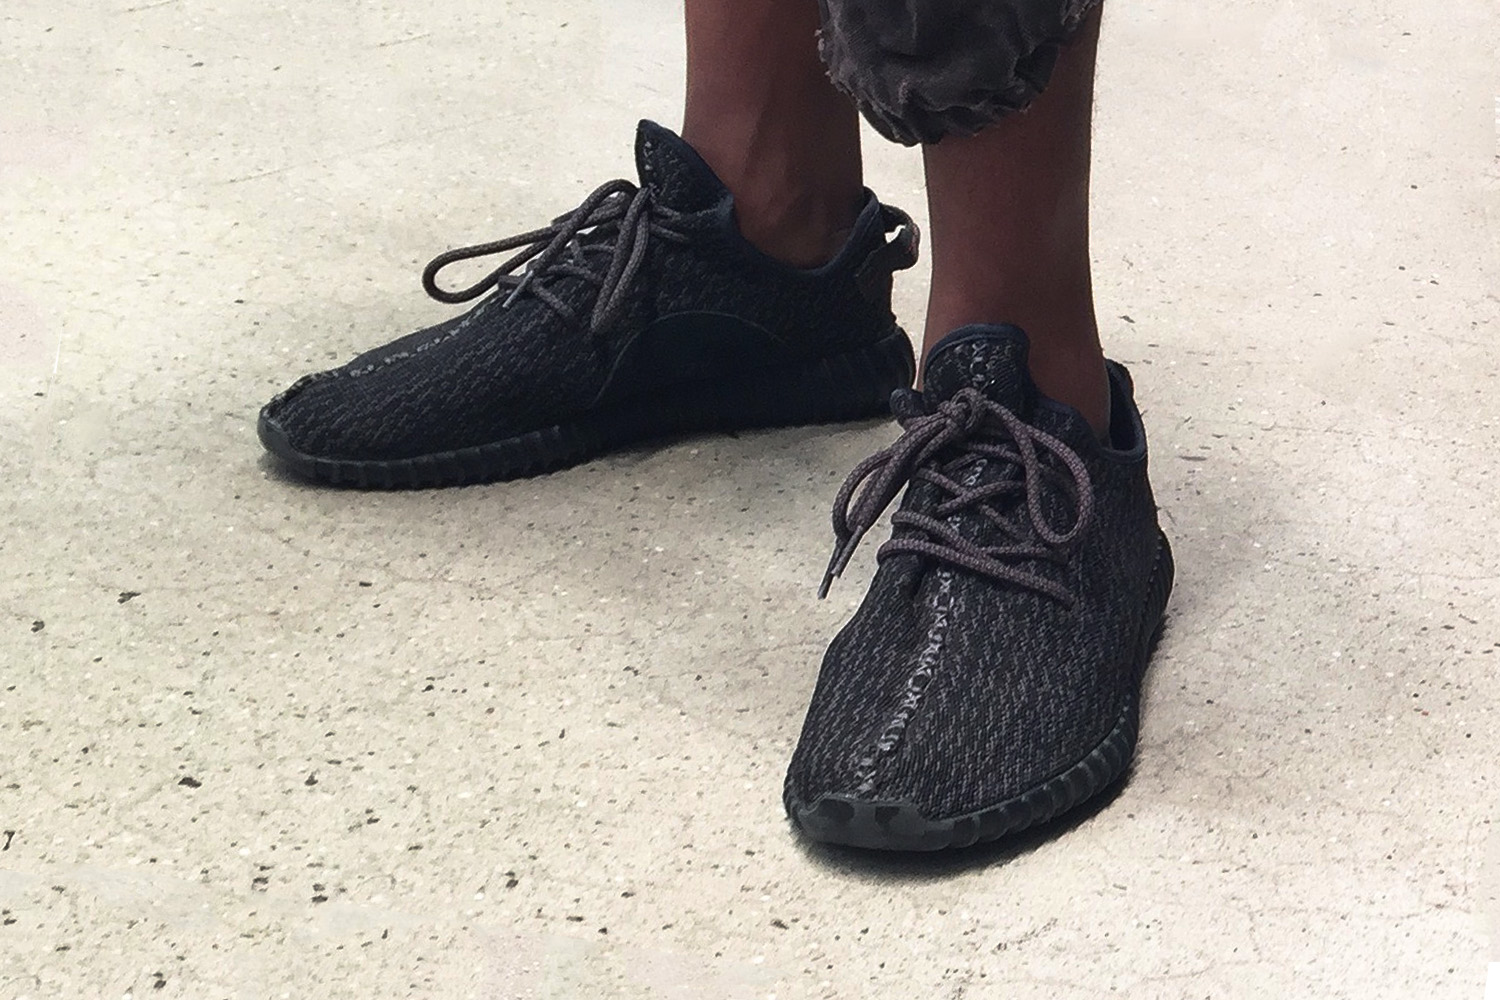 What's SPLY stand for on the new Yeezy 350 boost v2's?